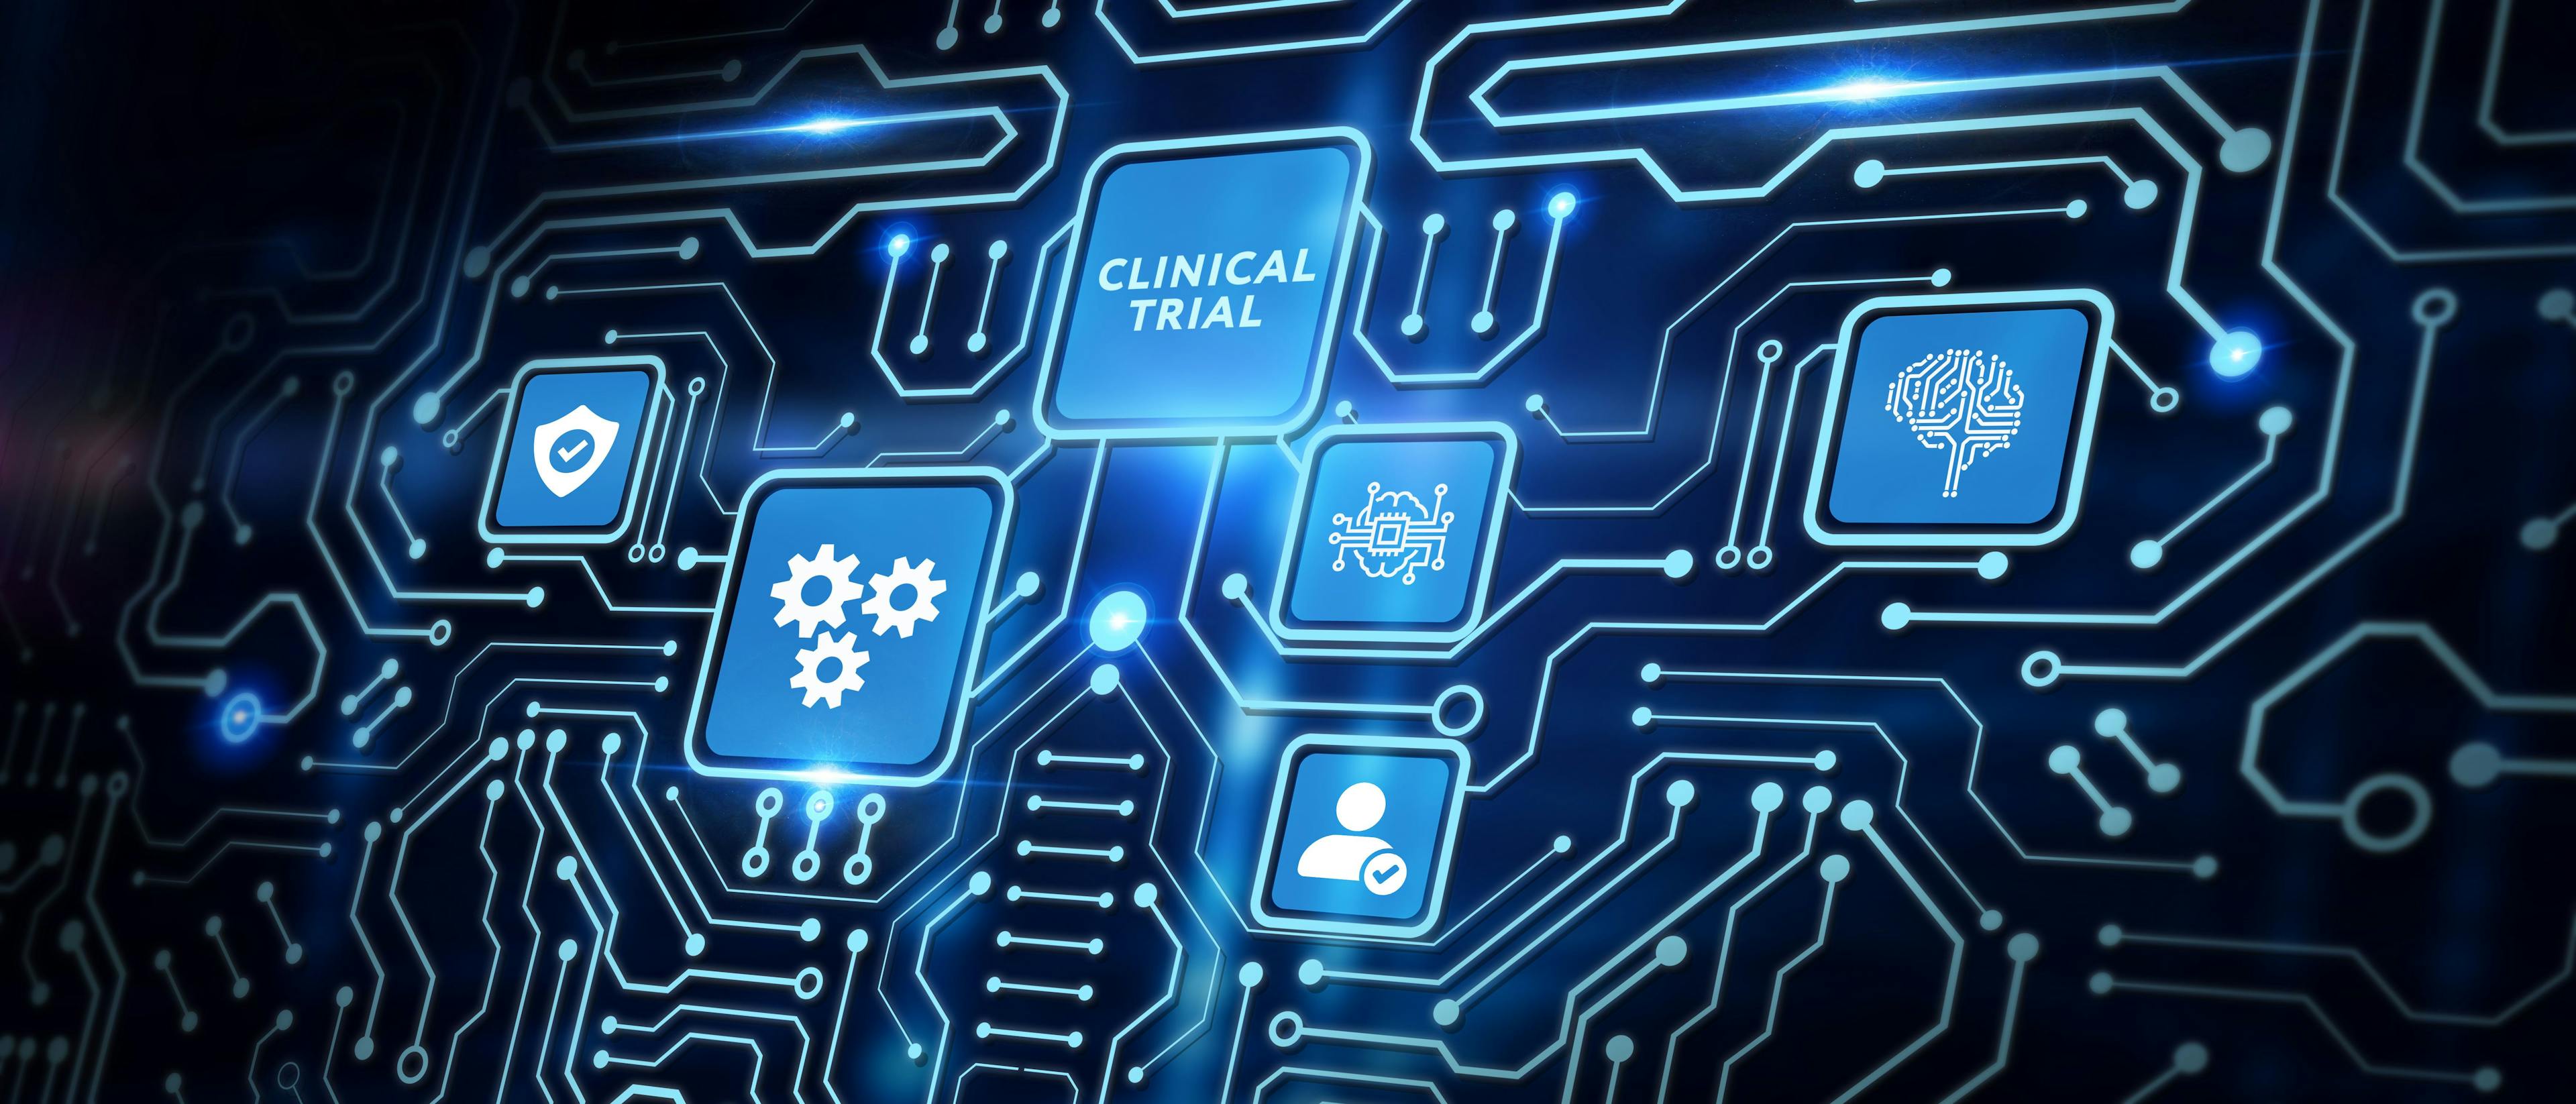 Image credit: putilov_denis | stock.adobe.com. Business, Technology, Internet and network concept. Virtual display: Clinical trial